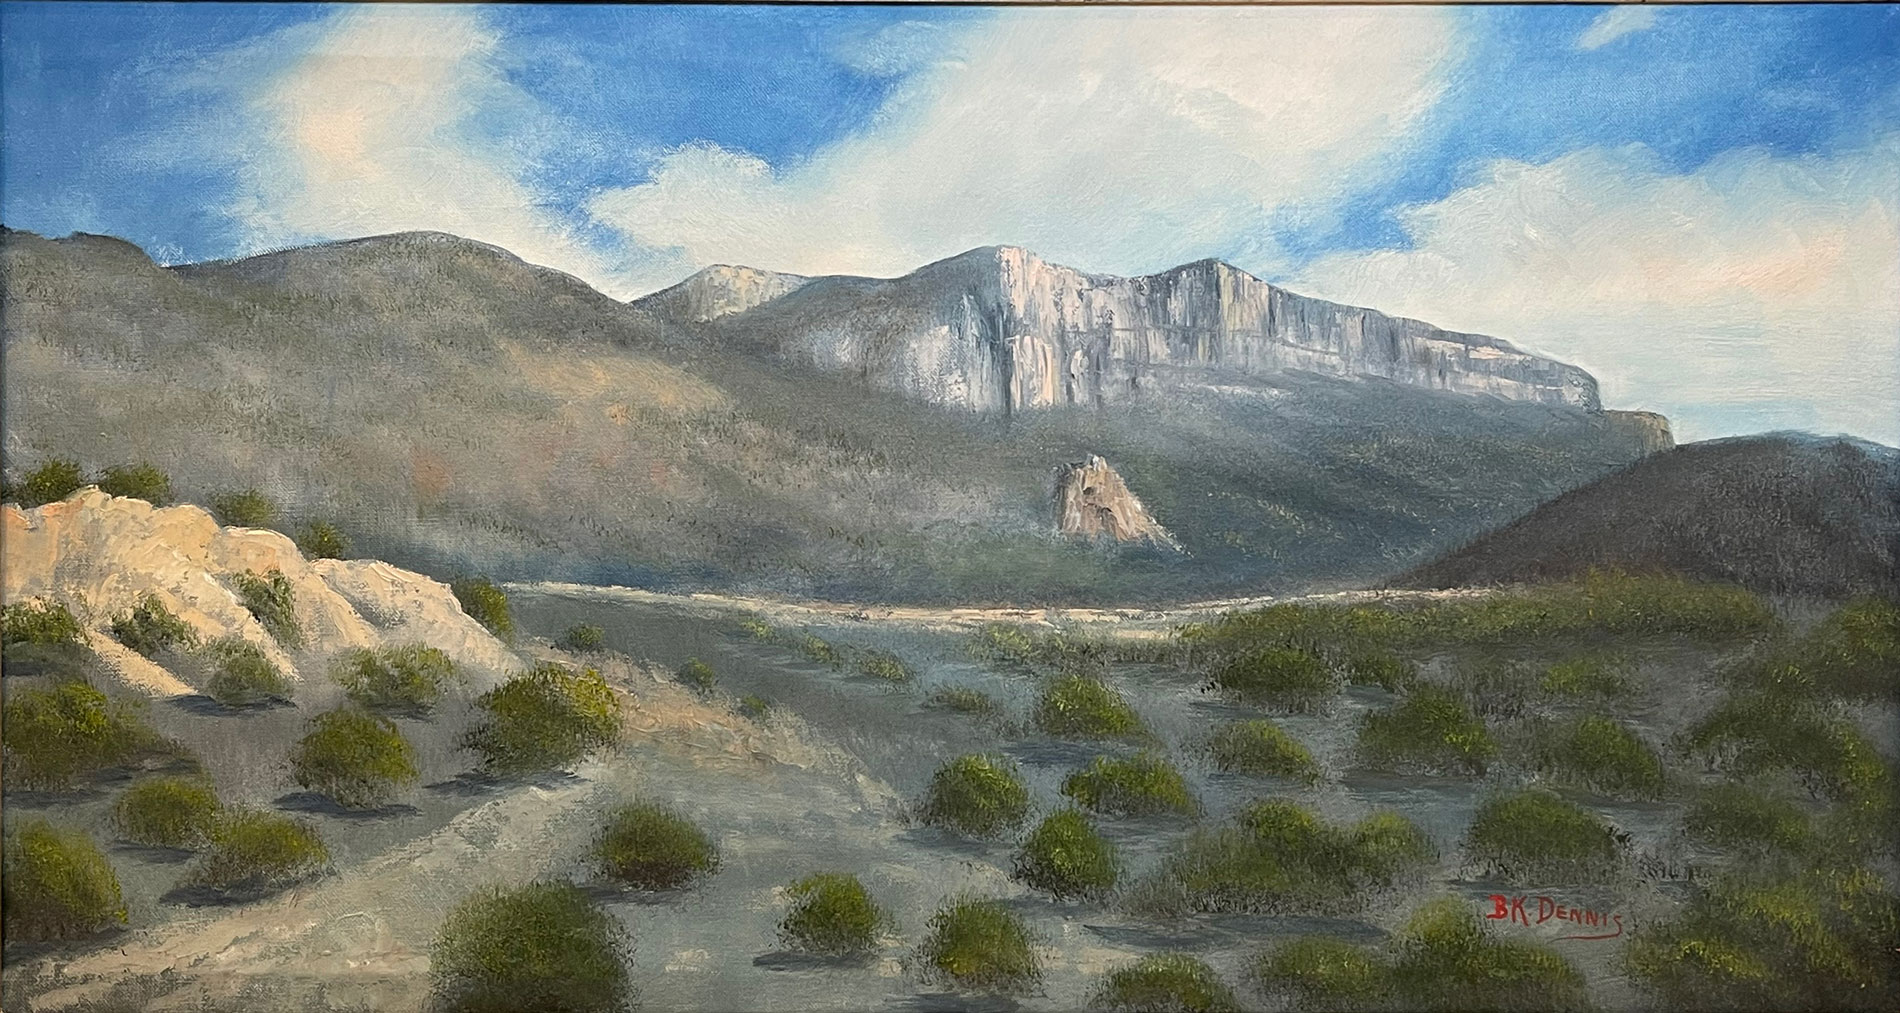 Alto Relex with blue sky and fluffy clouds, in the Big Bend National Park. Painting by BK Dennis of Alpine, TX